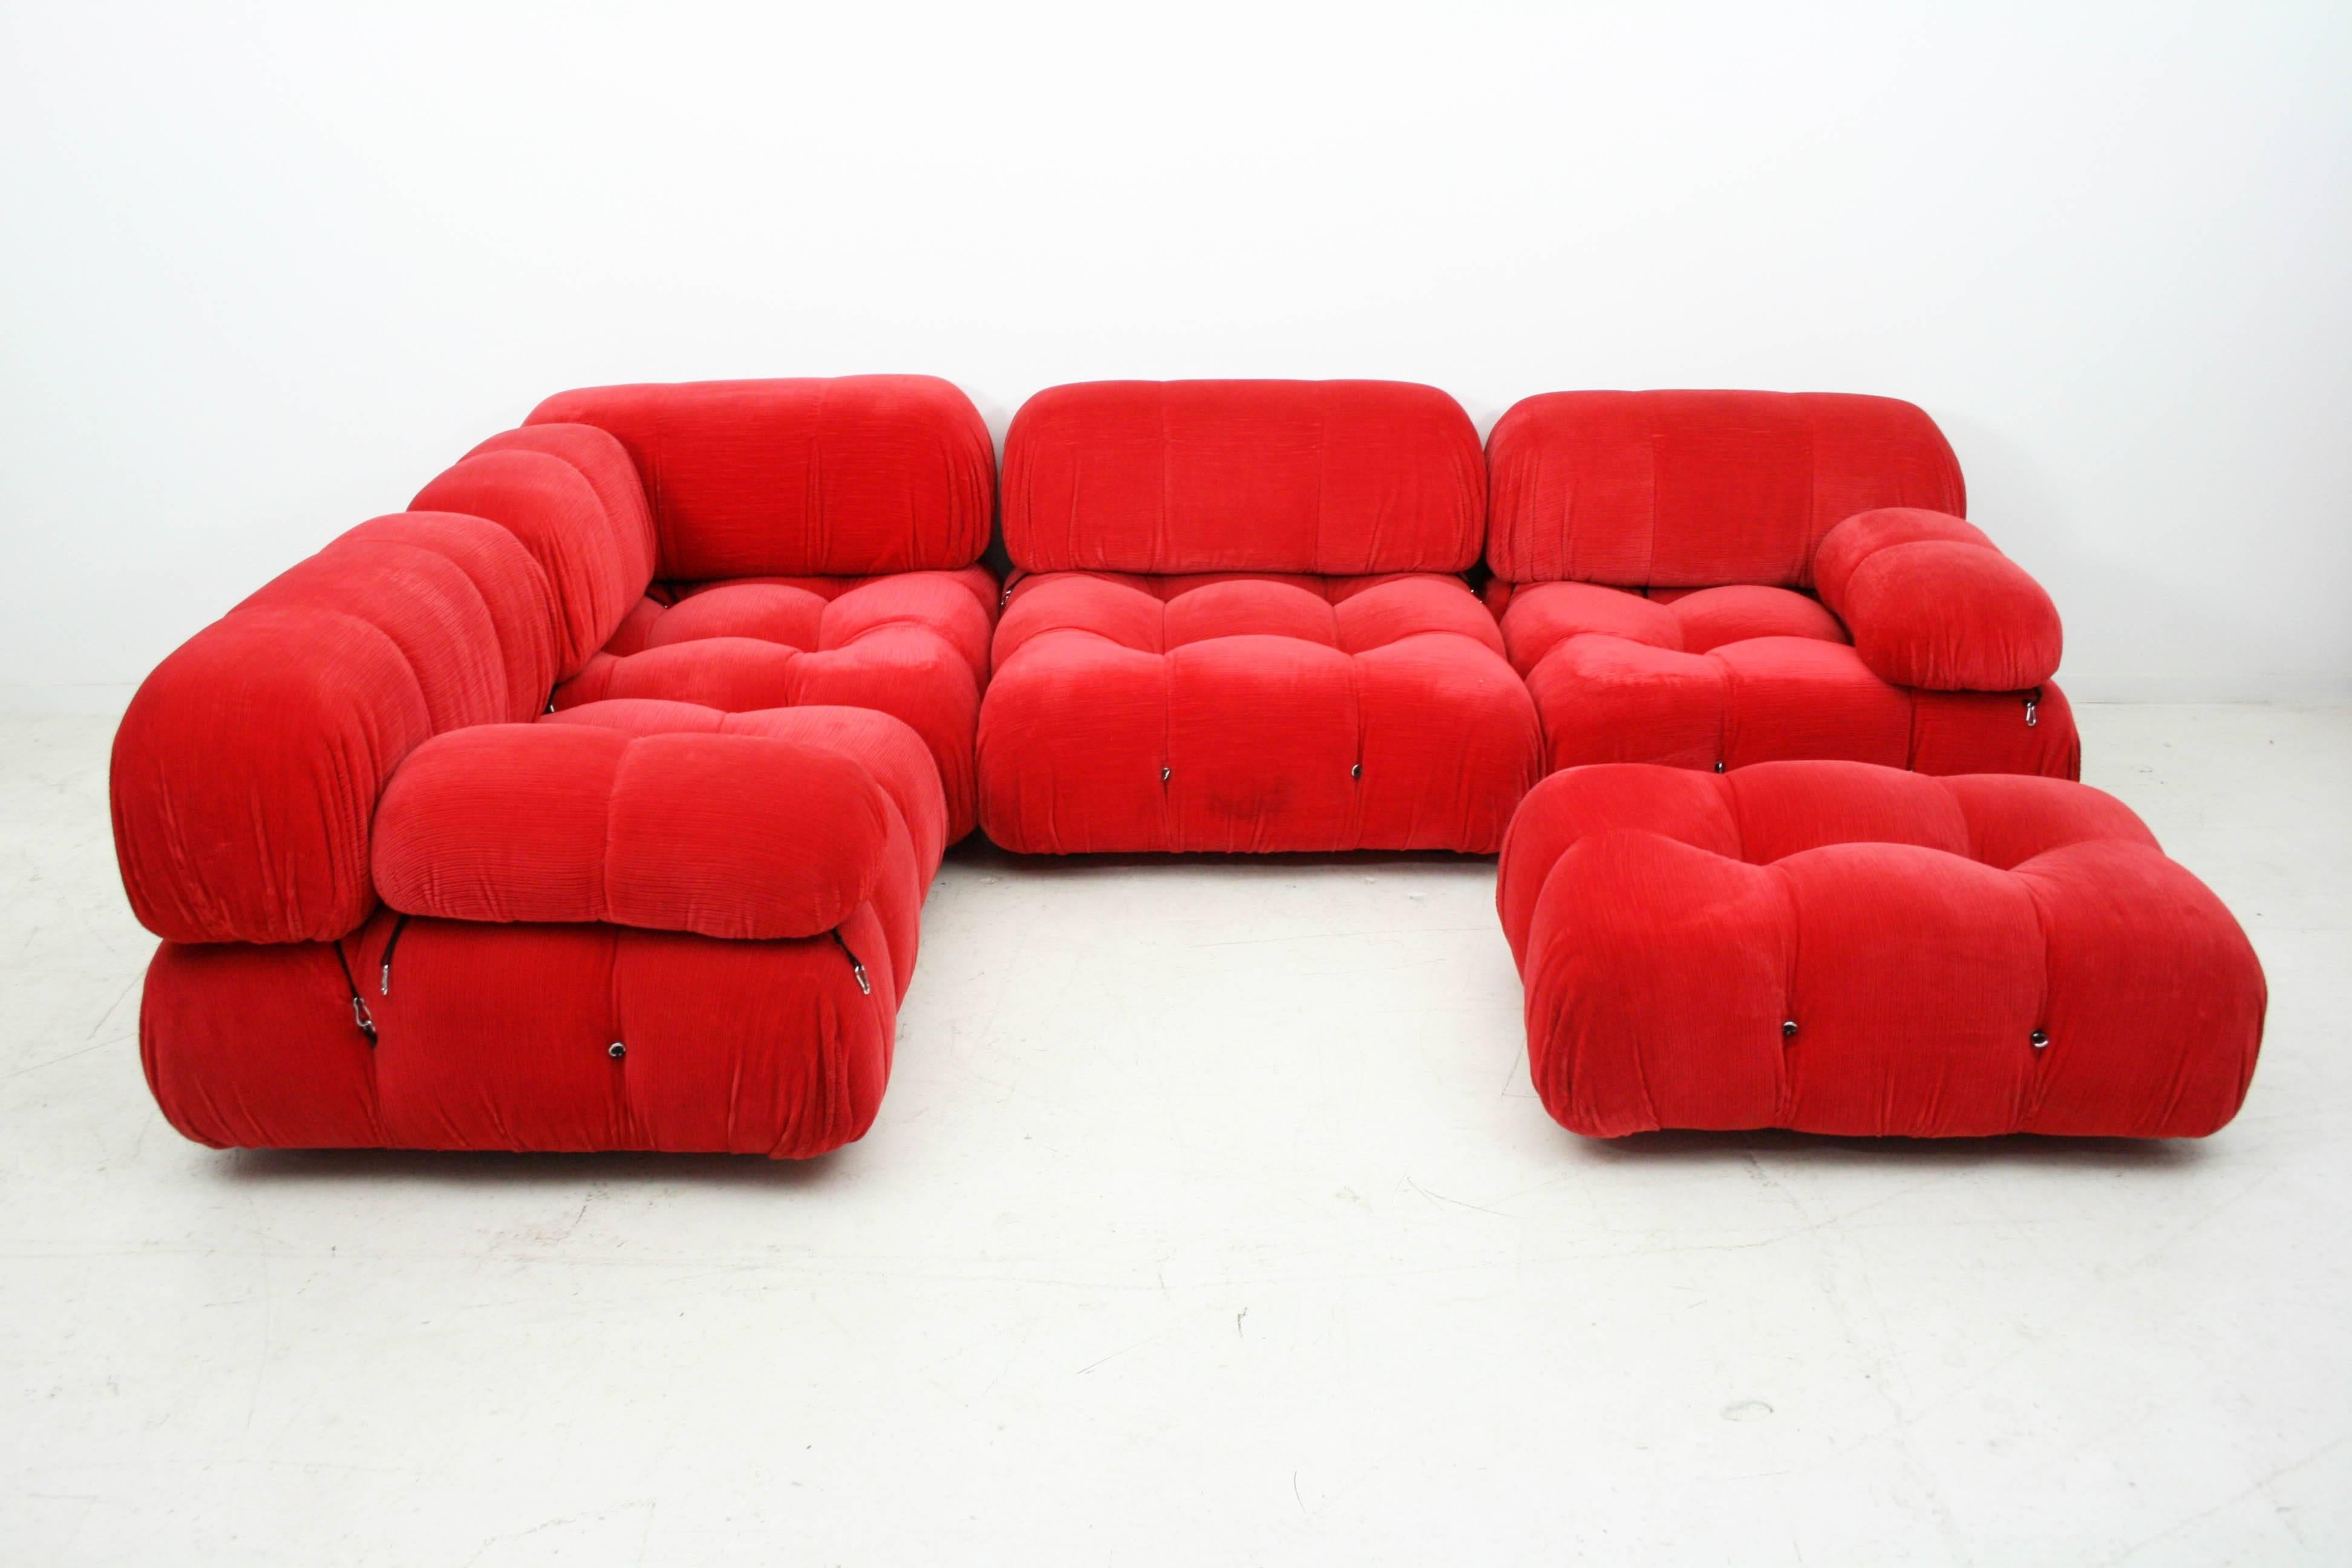 A highly modular 'Camaleonda' sofa in original red upholstery designed by renowned architect Mario Bellini. All the elements can be used freely and apart from one another with rings and carabiners to create a perfect 'seating landscape.

Amazing